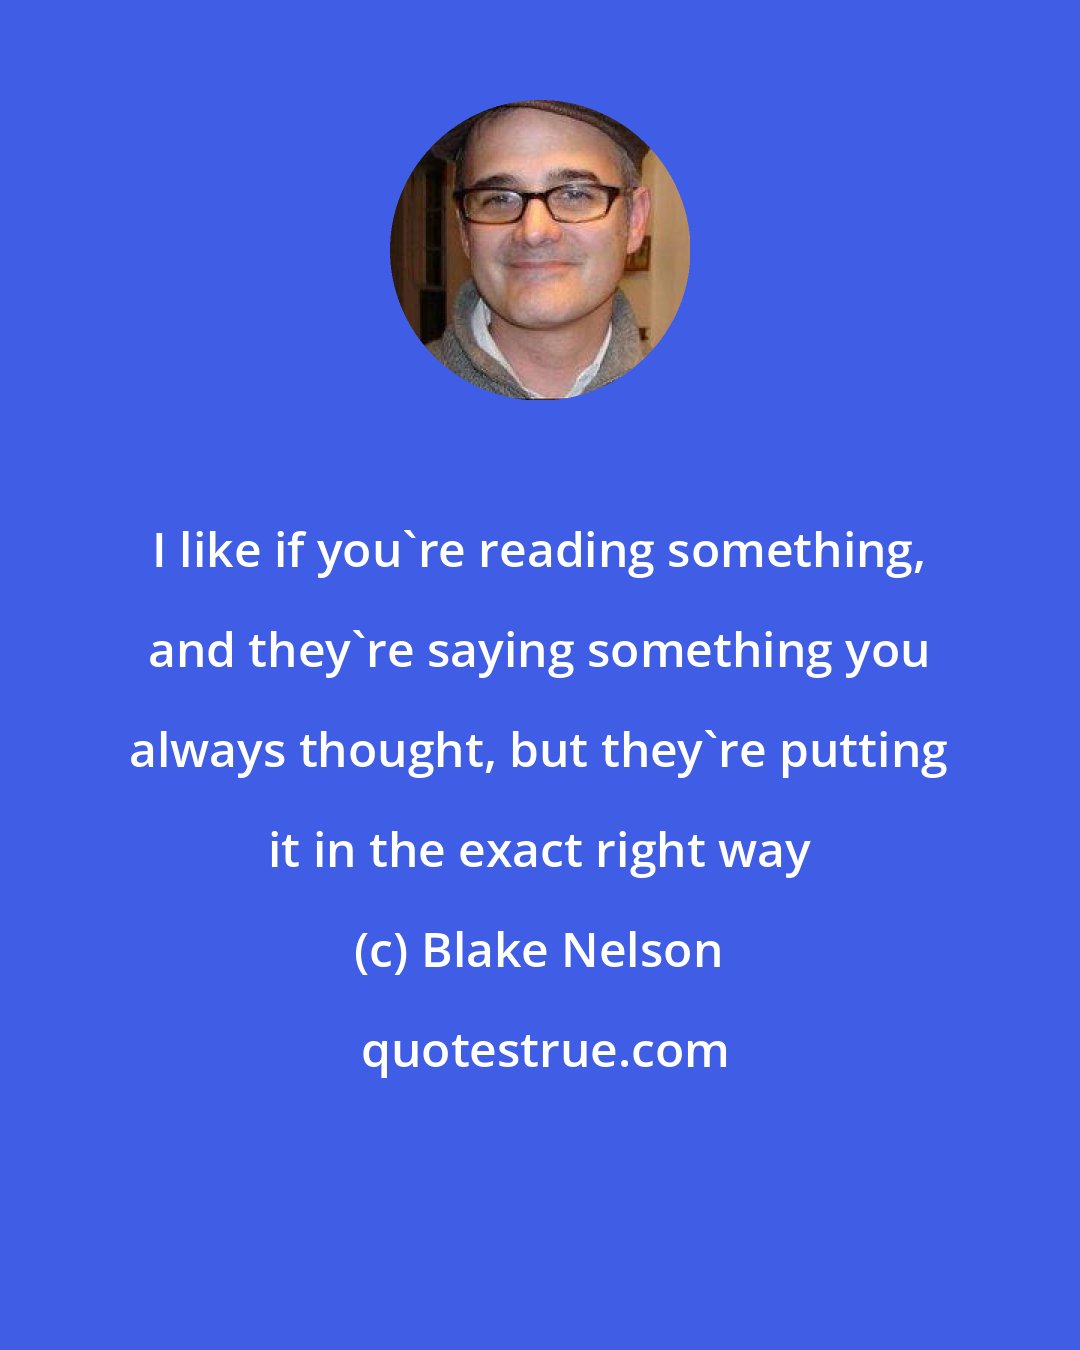 Blake Nelson: I like if you're reading something, and they're saying something you always thought, but they're putting it in the exact right way